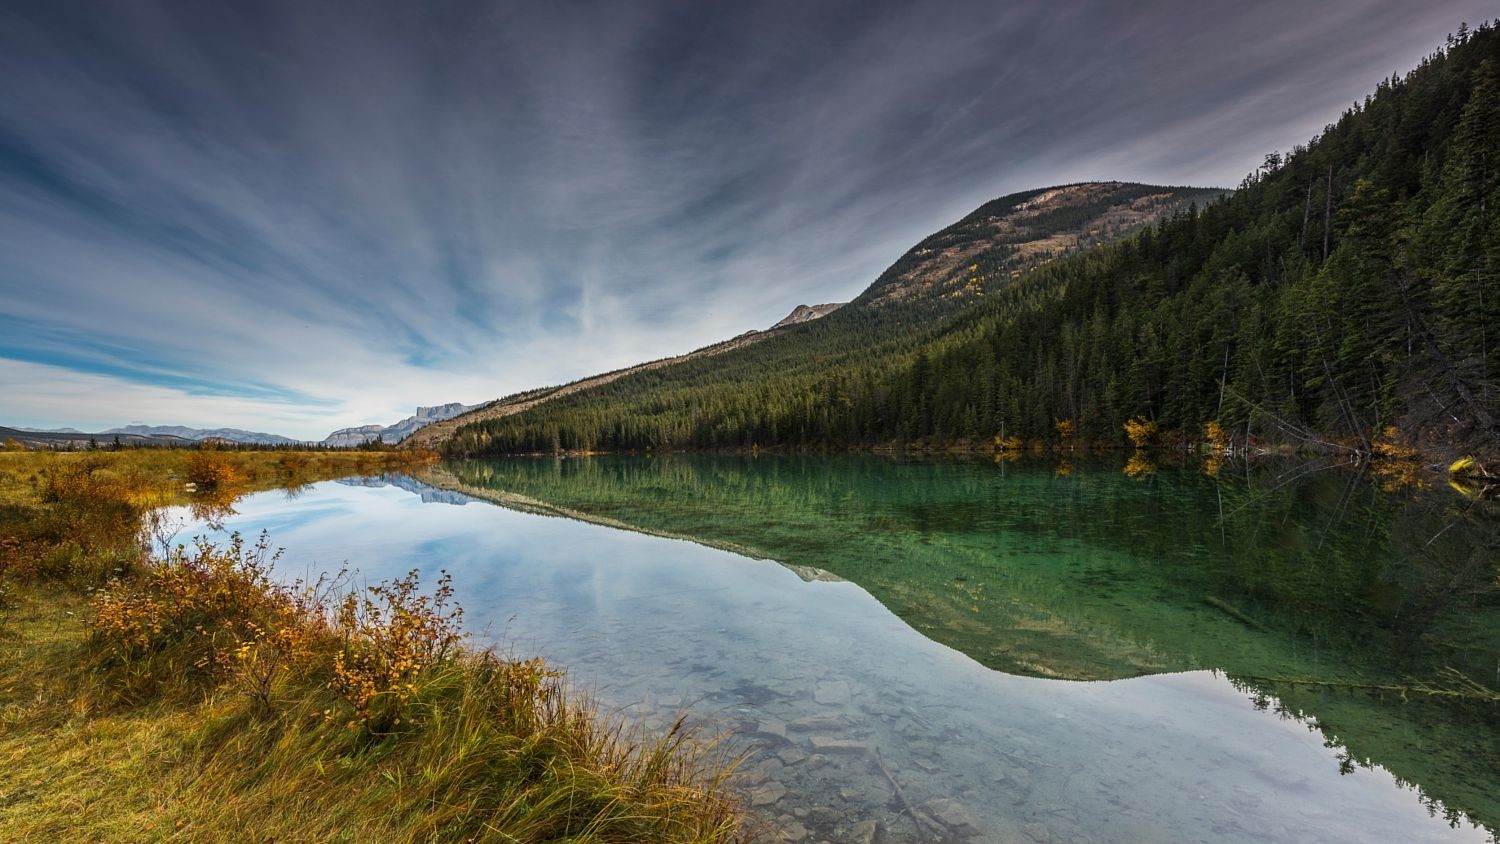 nature, Photography, Landscape, Lake, Calm waters, Reflection, Mountains, Forest, Fall, Dry grass, Alberta, Canada Wallpaper